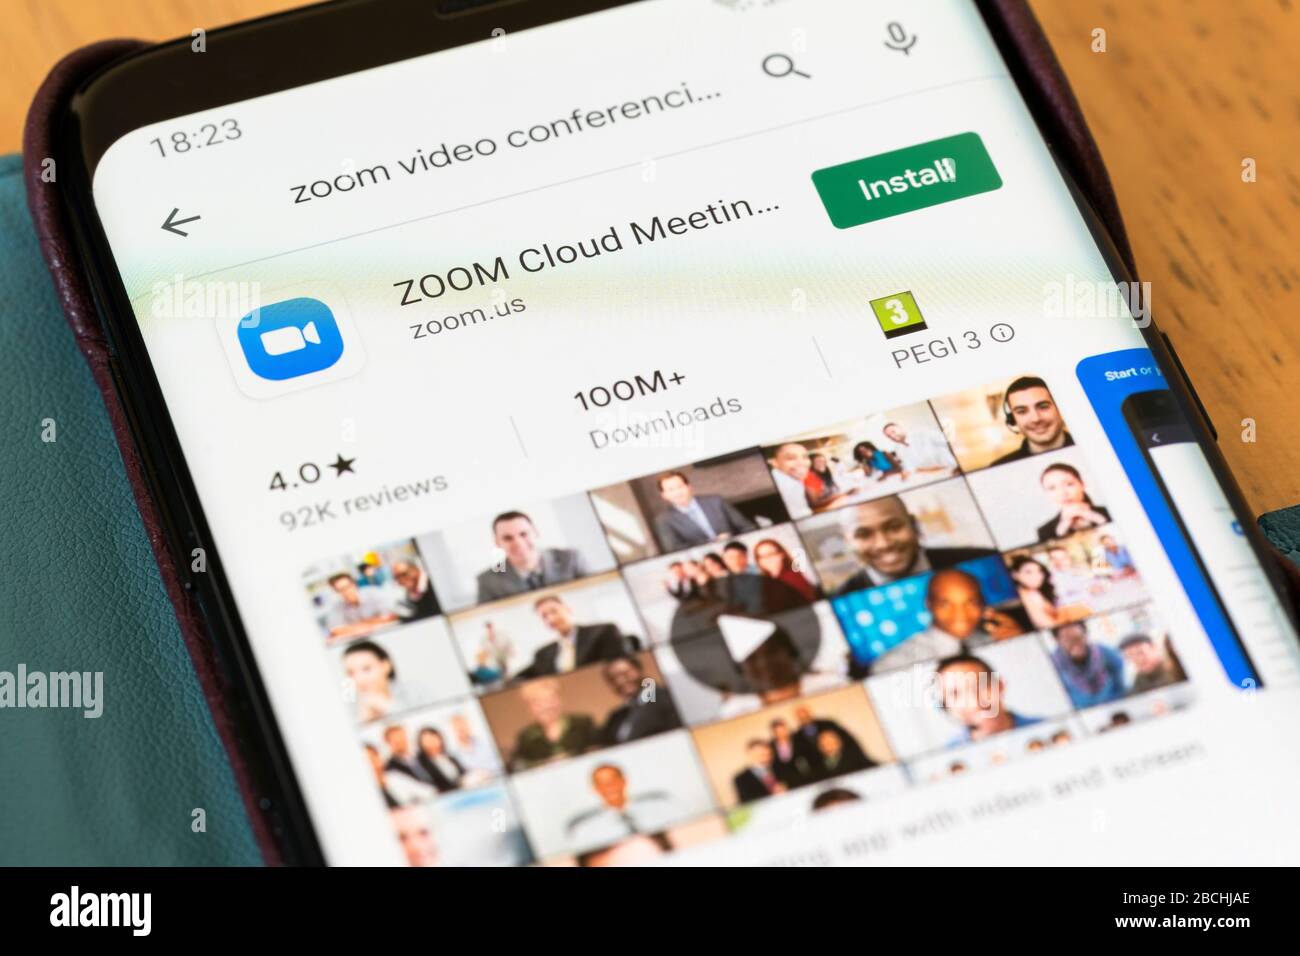 The Google Play install screen for the Zoom video conferencing application. There are security issues and privacy concerns with the app Stock Photo